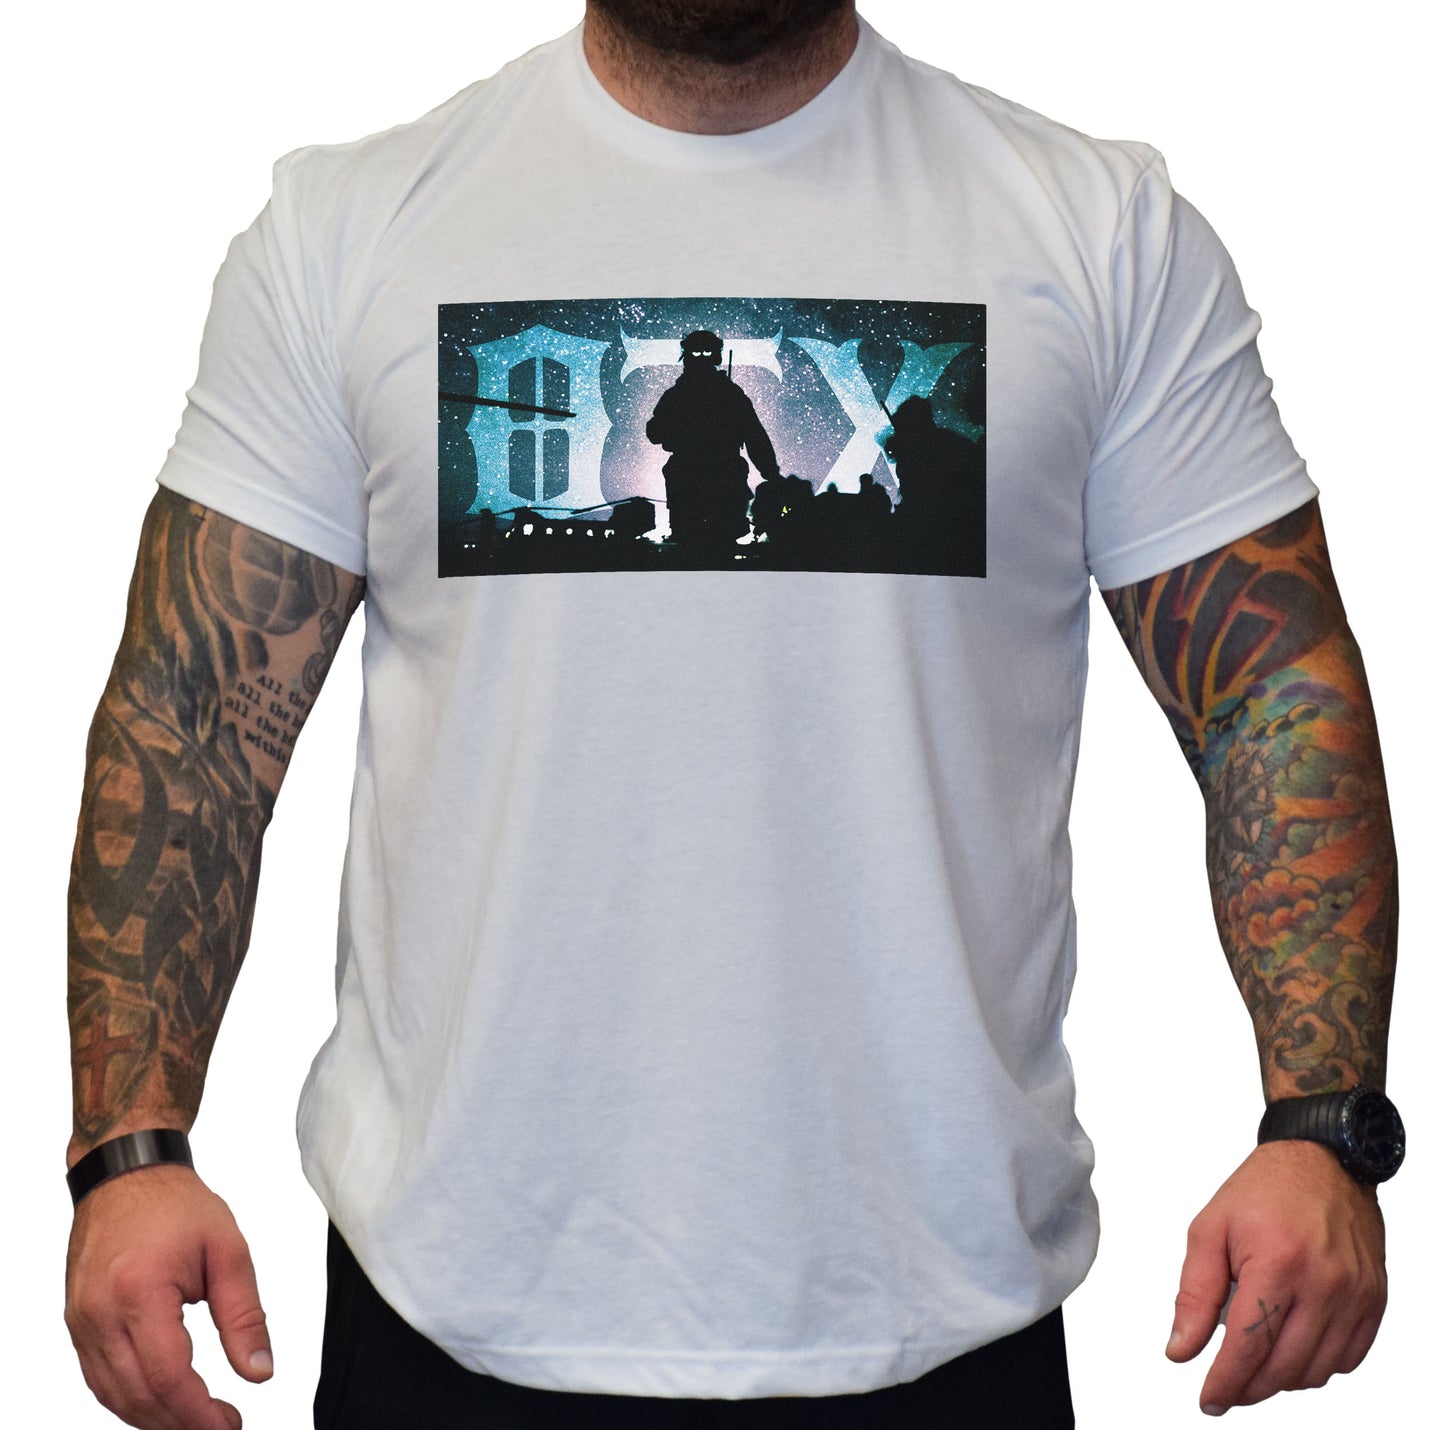 Out Of The Shadows Tee